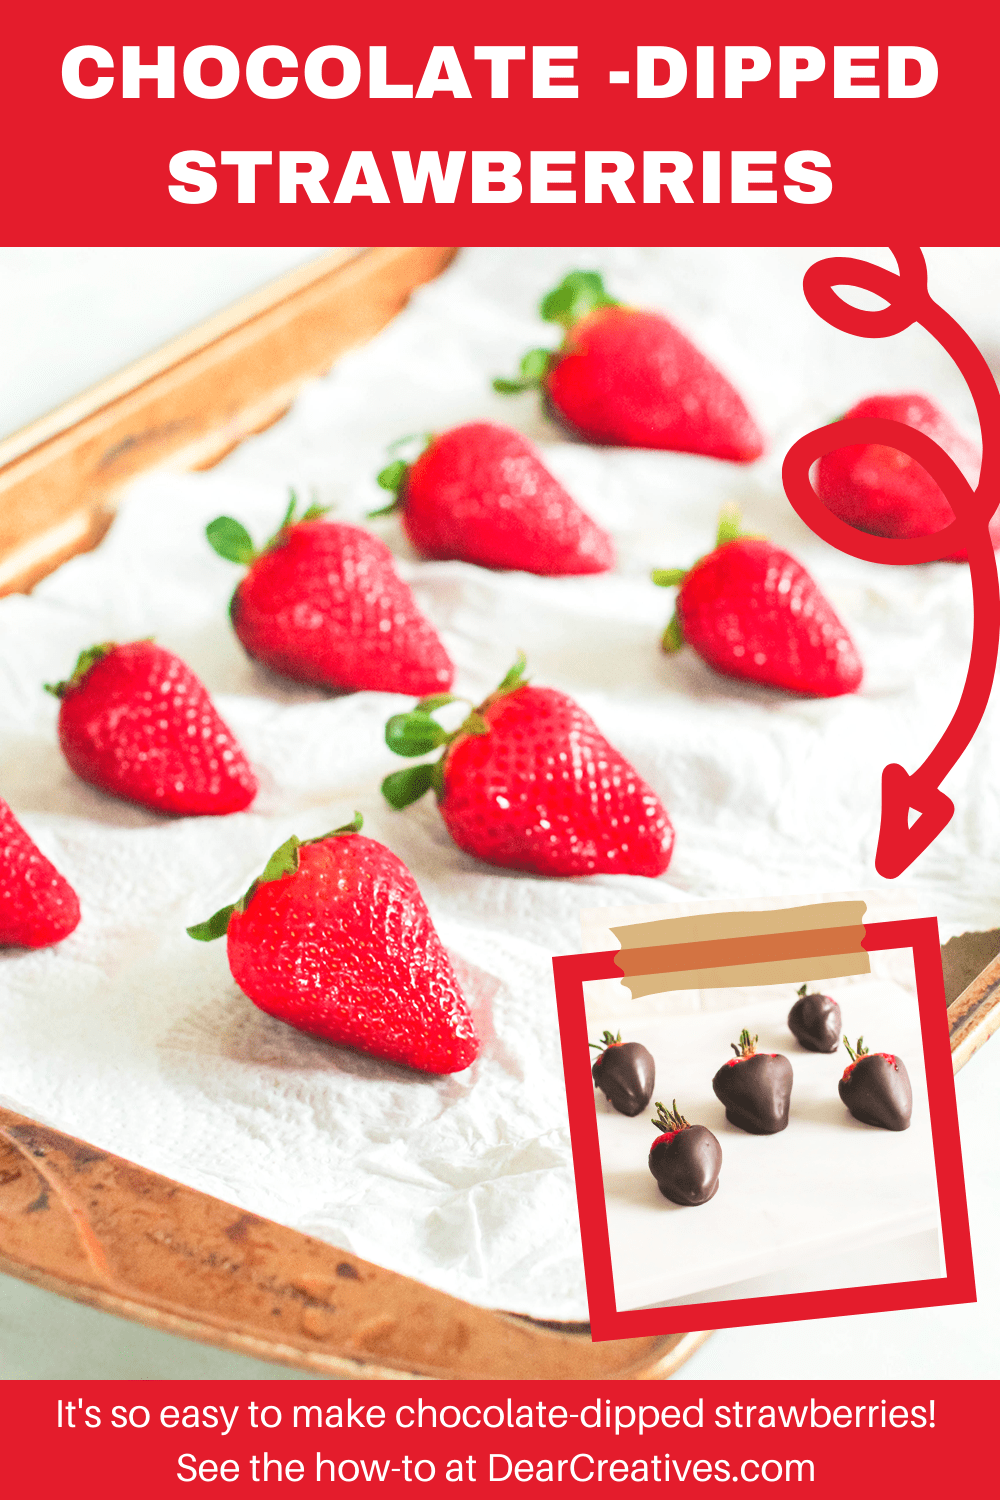 Chocolate Dipped Strawberries Recipe - See how easy it is to make strawberries dipped in chocolate. Perfect for celebrations such as Mother's Day... See how easy it is! DearCreatives.com